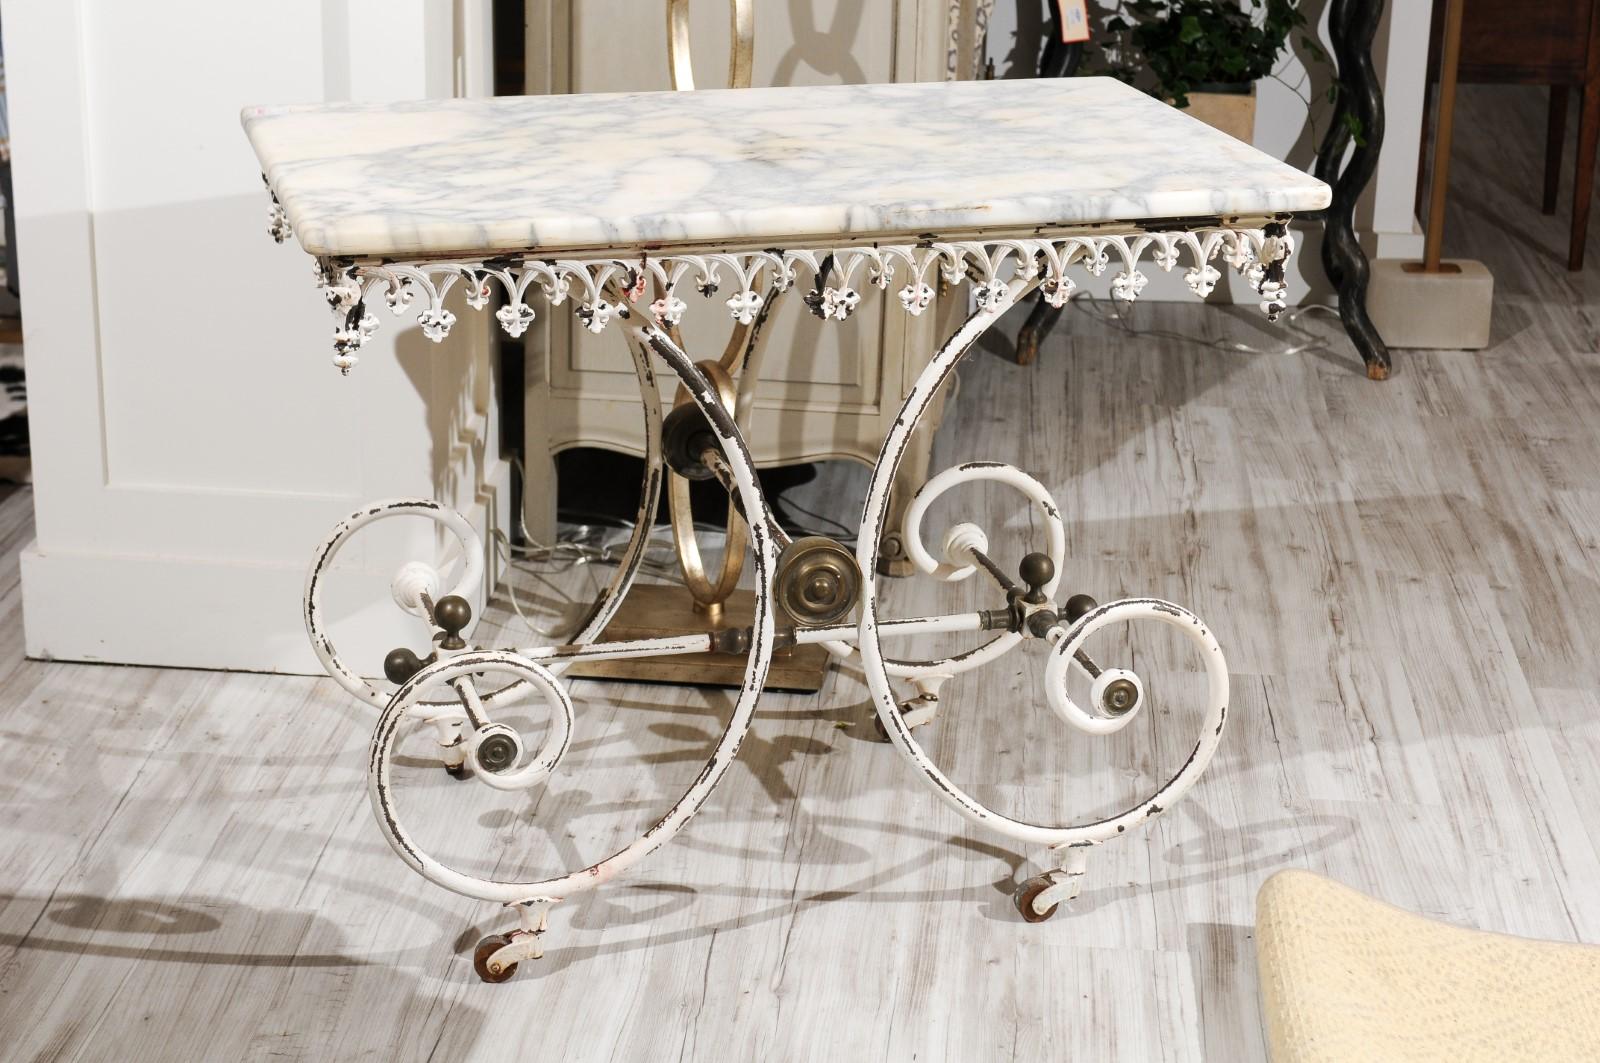 A French white painted iron baker's table on casters from the early 20th century with rectangular marble top, Gothic-inspired apron, scrolling base and brass medallions. The lovely marble top for this French 1920s pastry table is what caught our eye